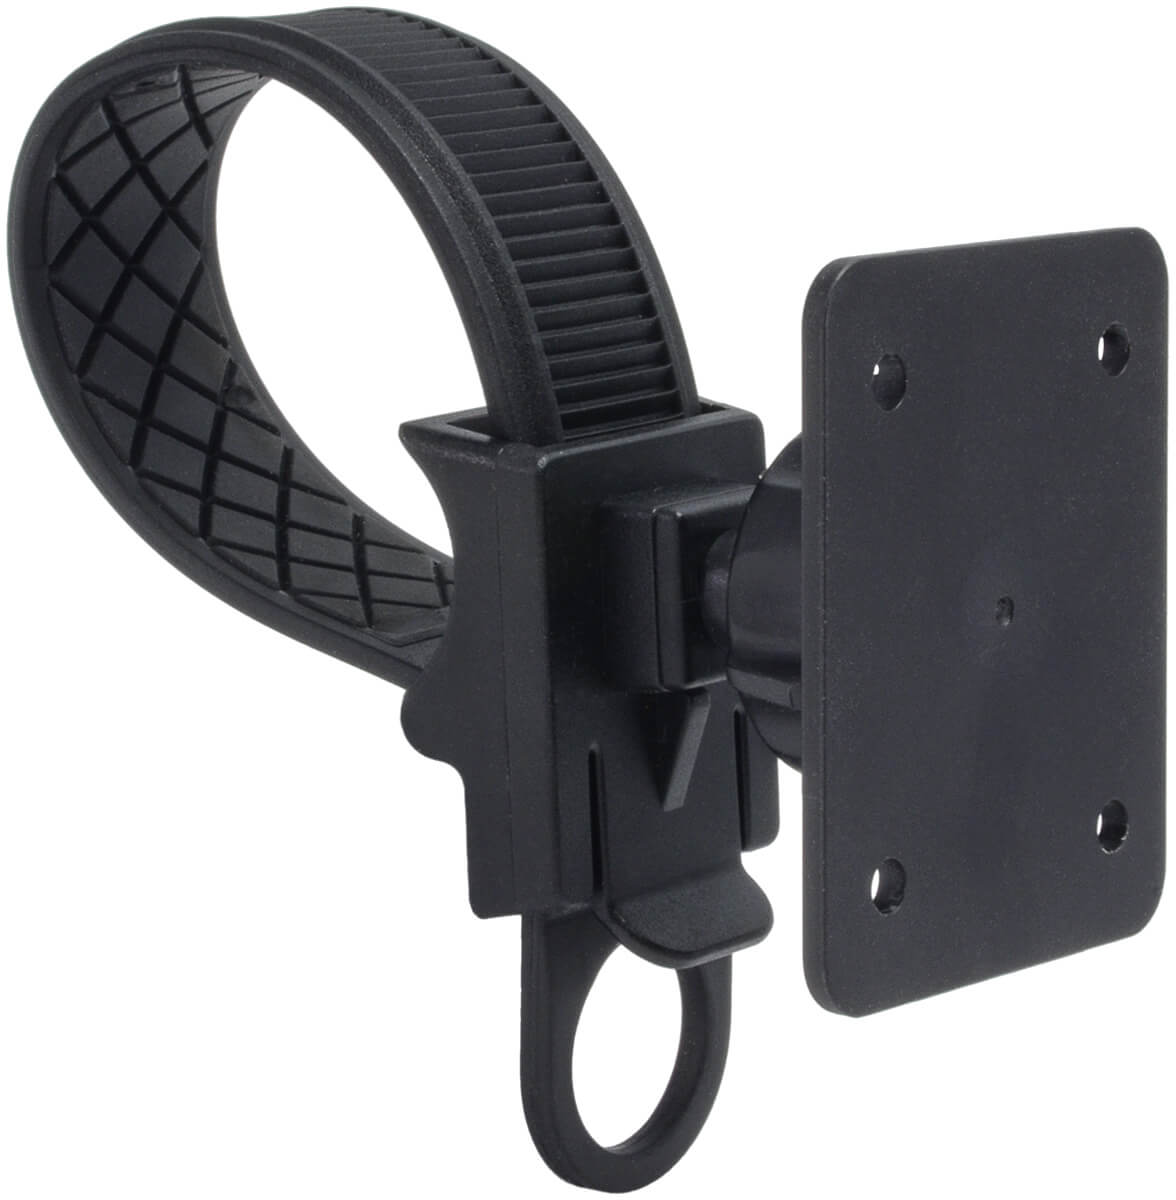 strap mount with AMPS plate mount